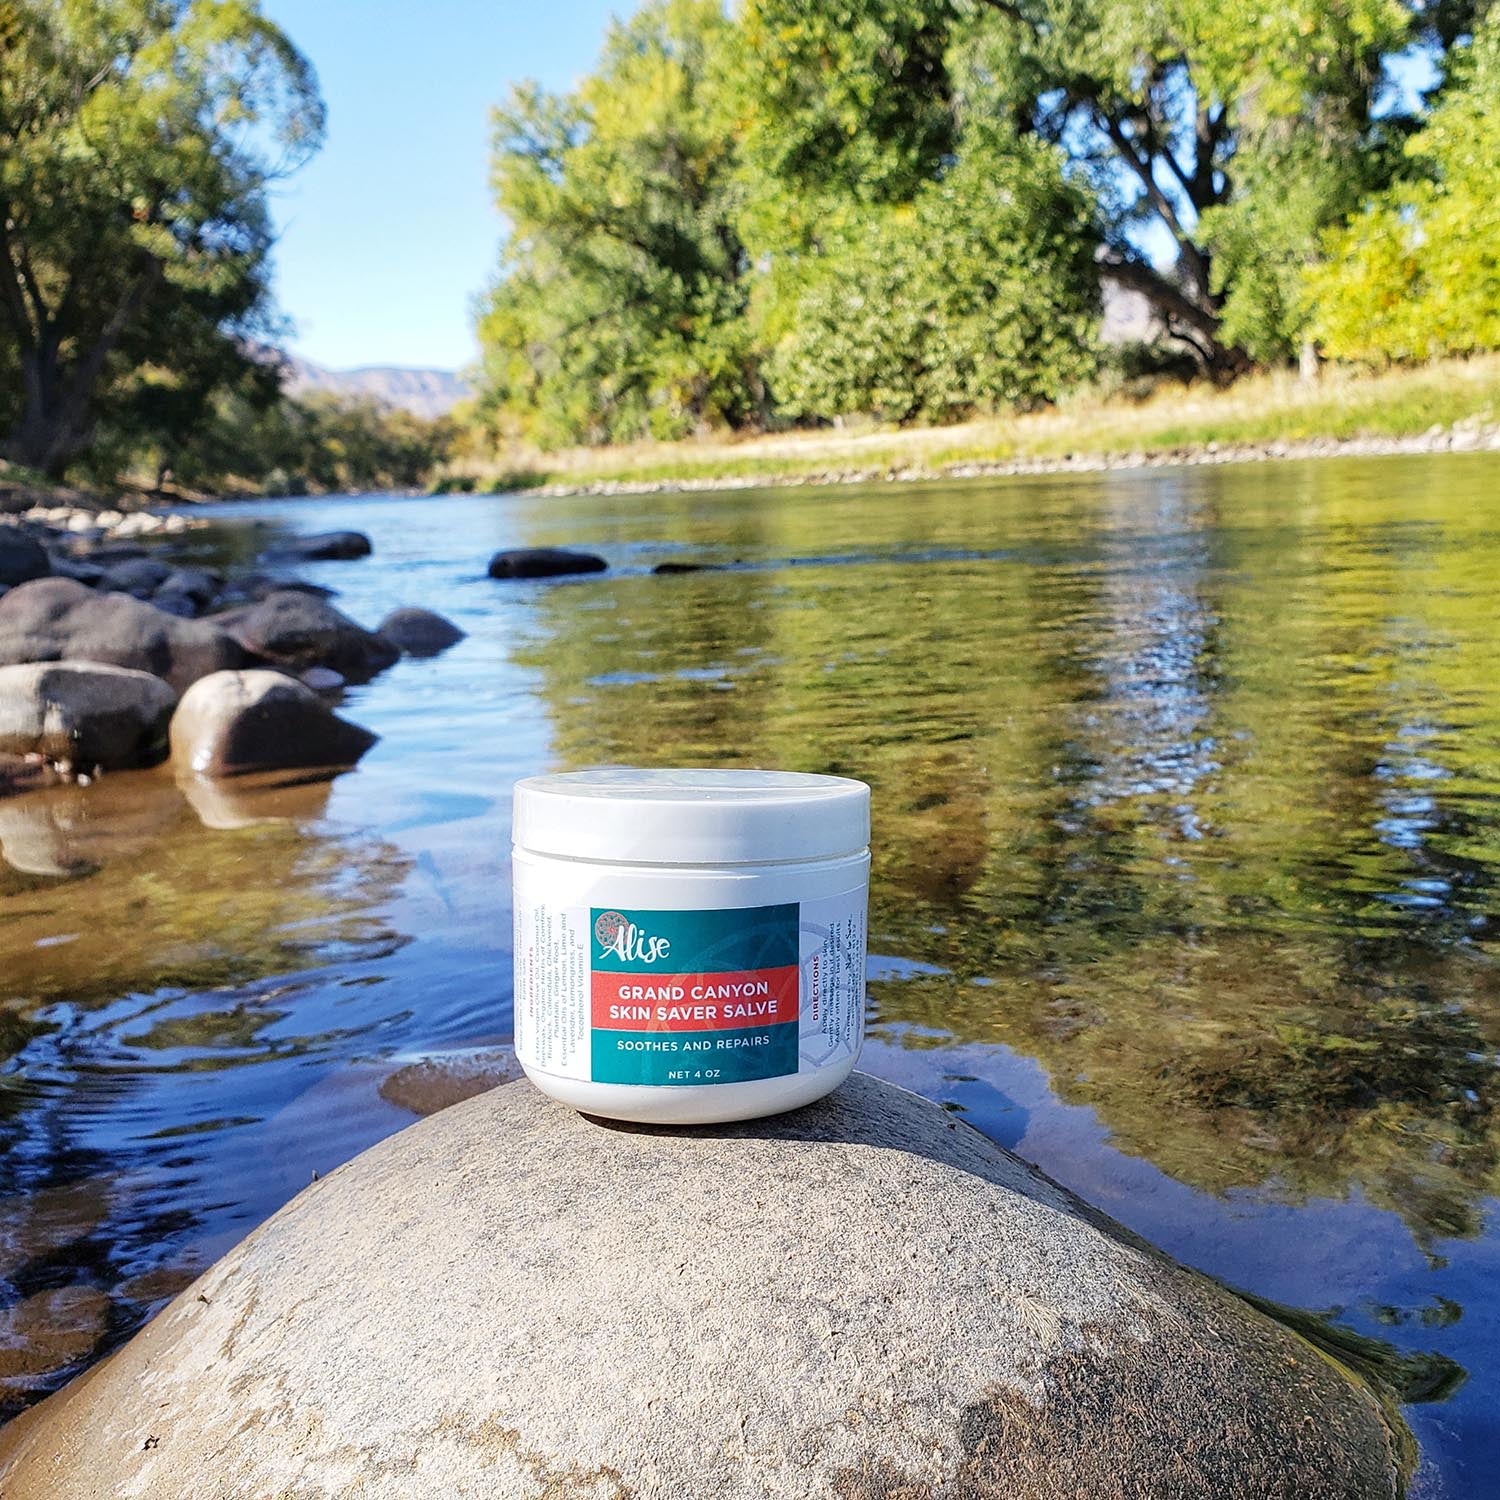 Grand Canyon skin saver salve by the river for dry rough skin alisebodycare